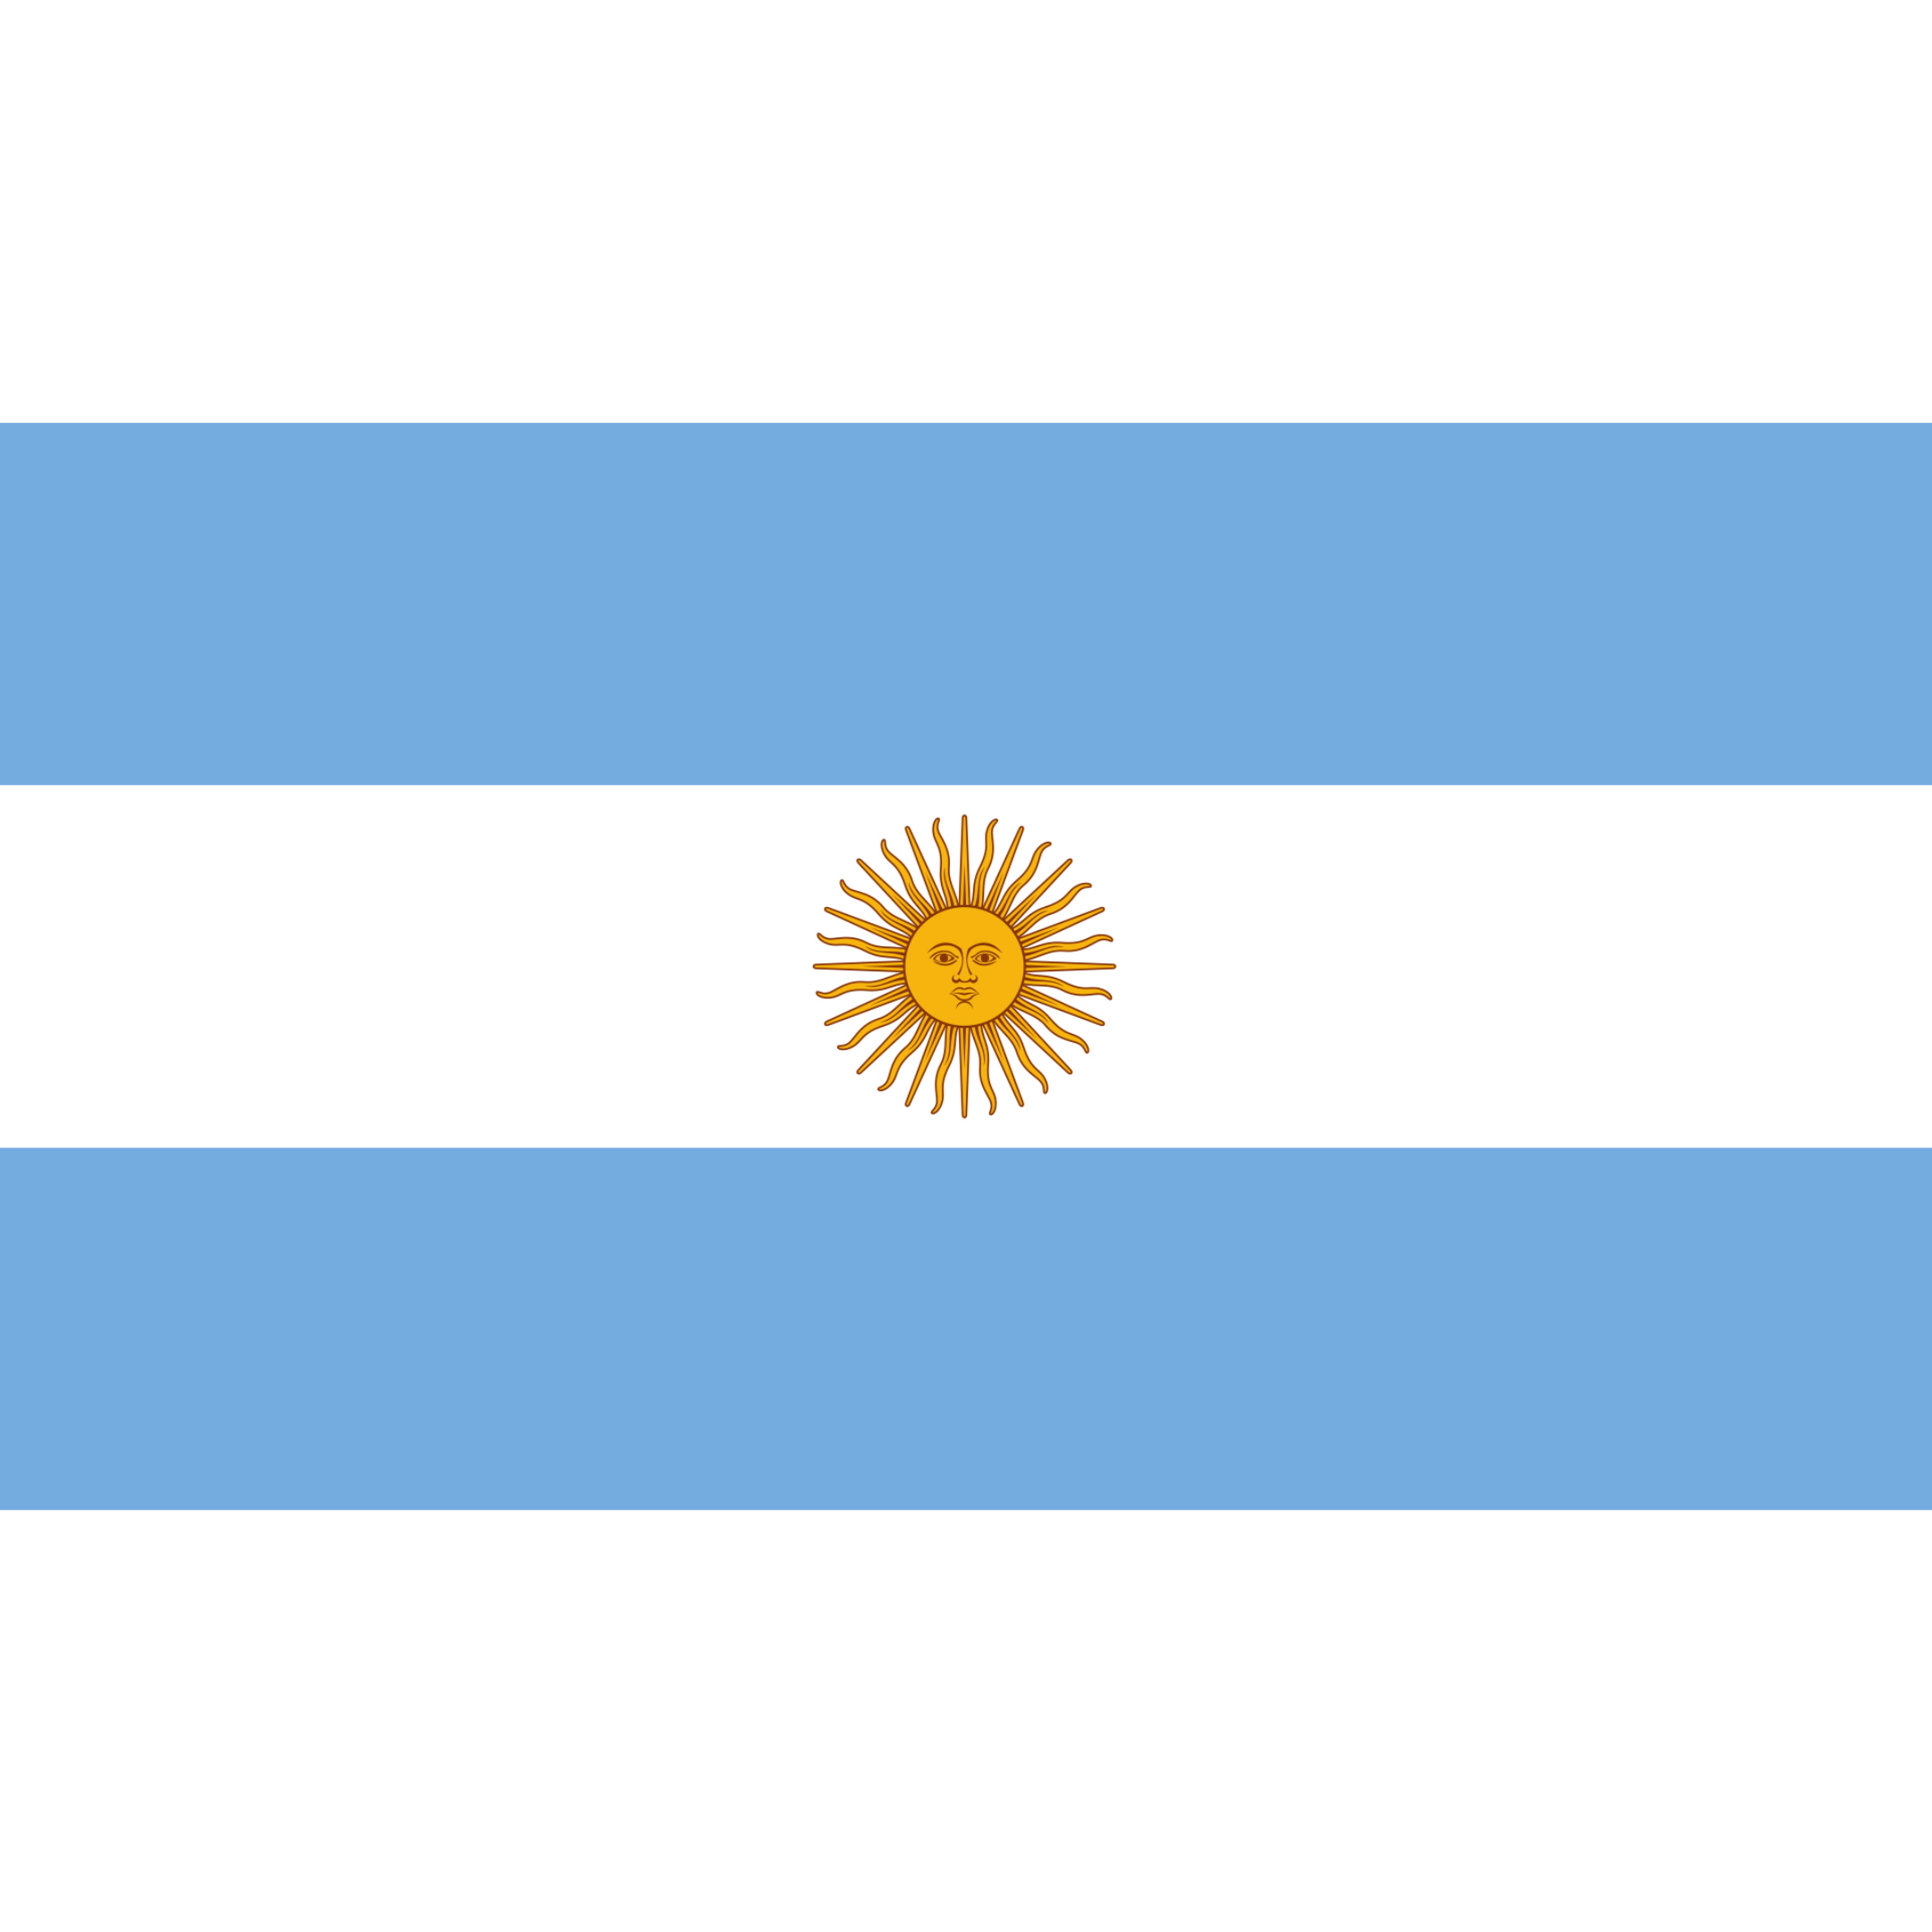 The flag of Argentina has 3 equal horizontal bands in light blue, white and light blue with a golden sun in the middle.